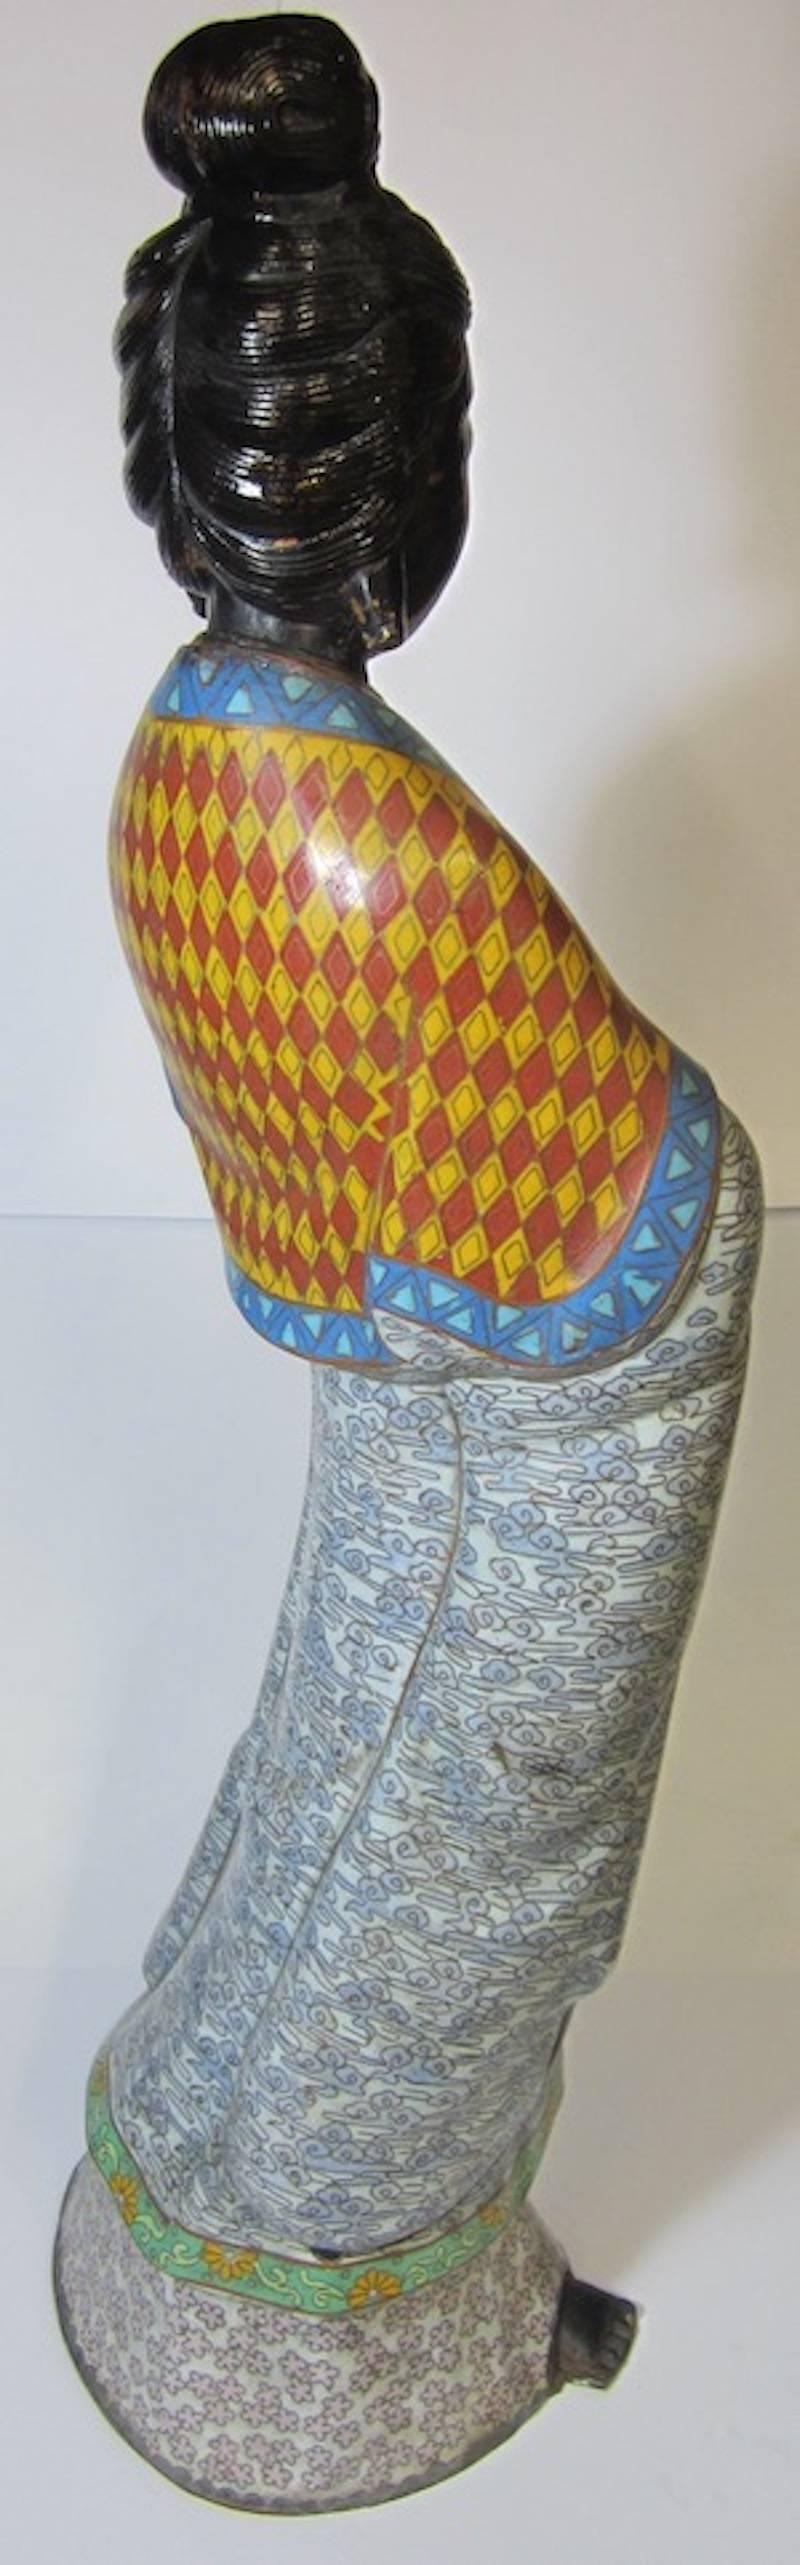 Early 20th Century Chinese Cloisonné Figure